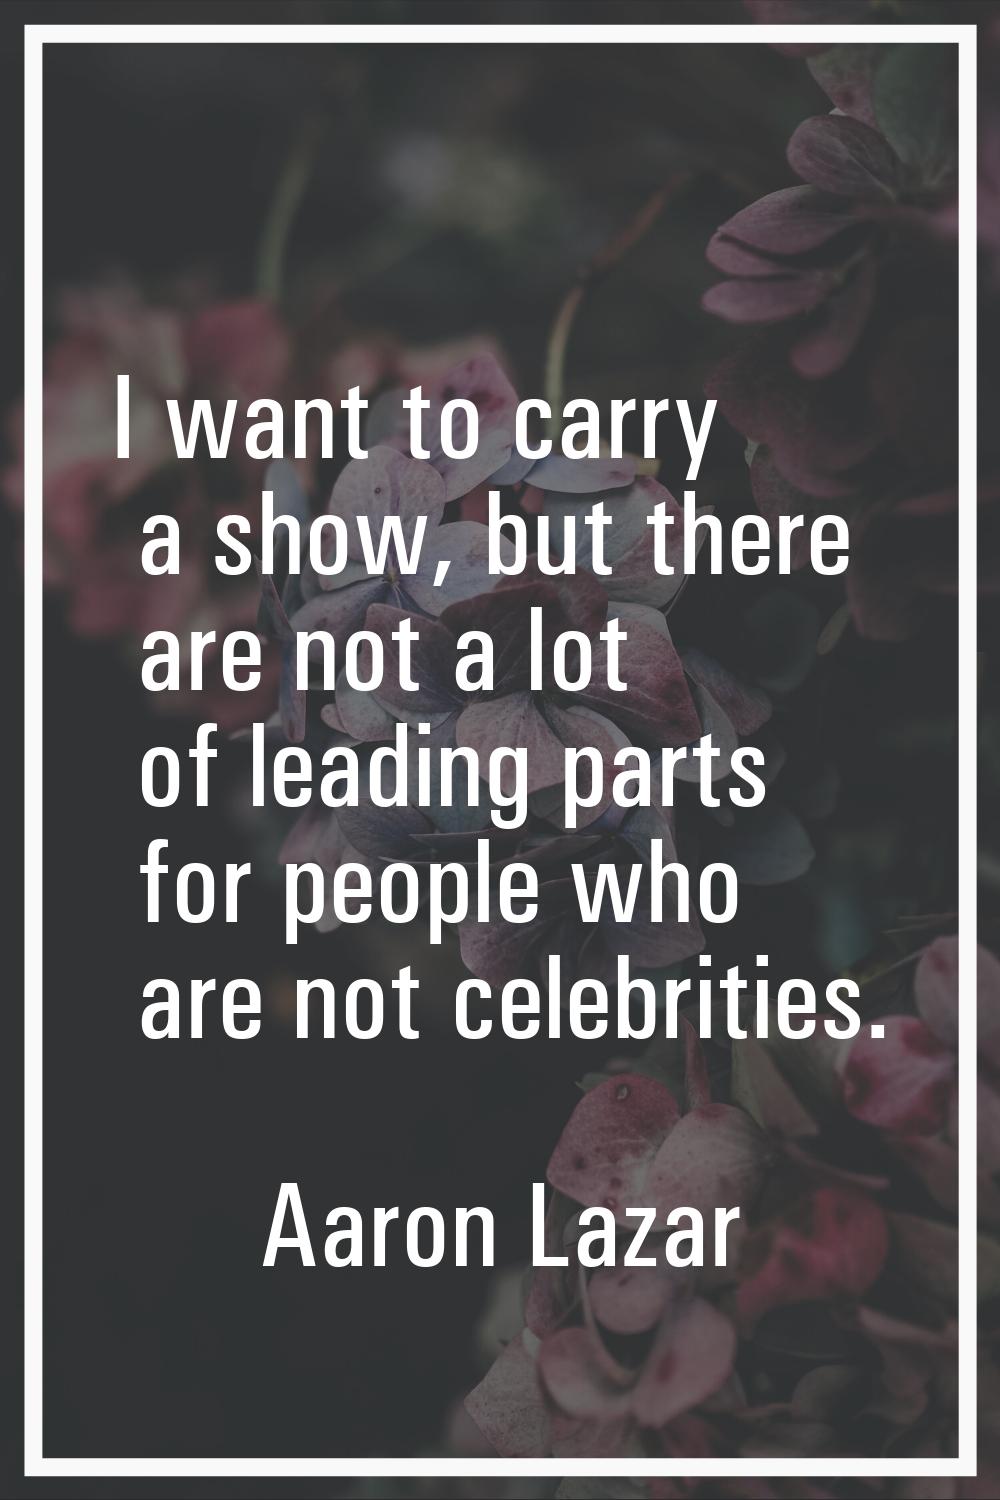 I want to carry a show, but there are not a lot of leading parts for people who are not celebrities